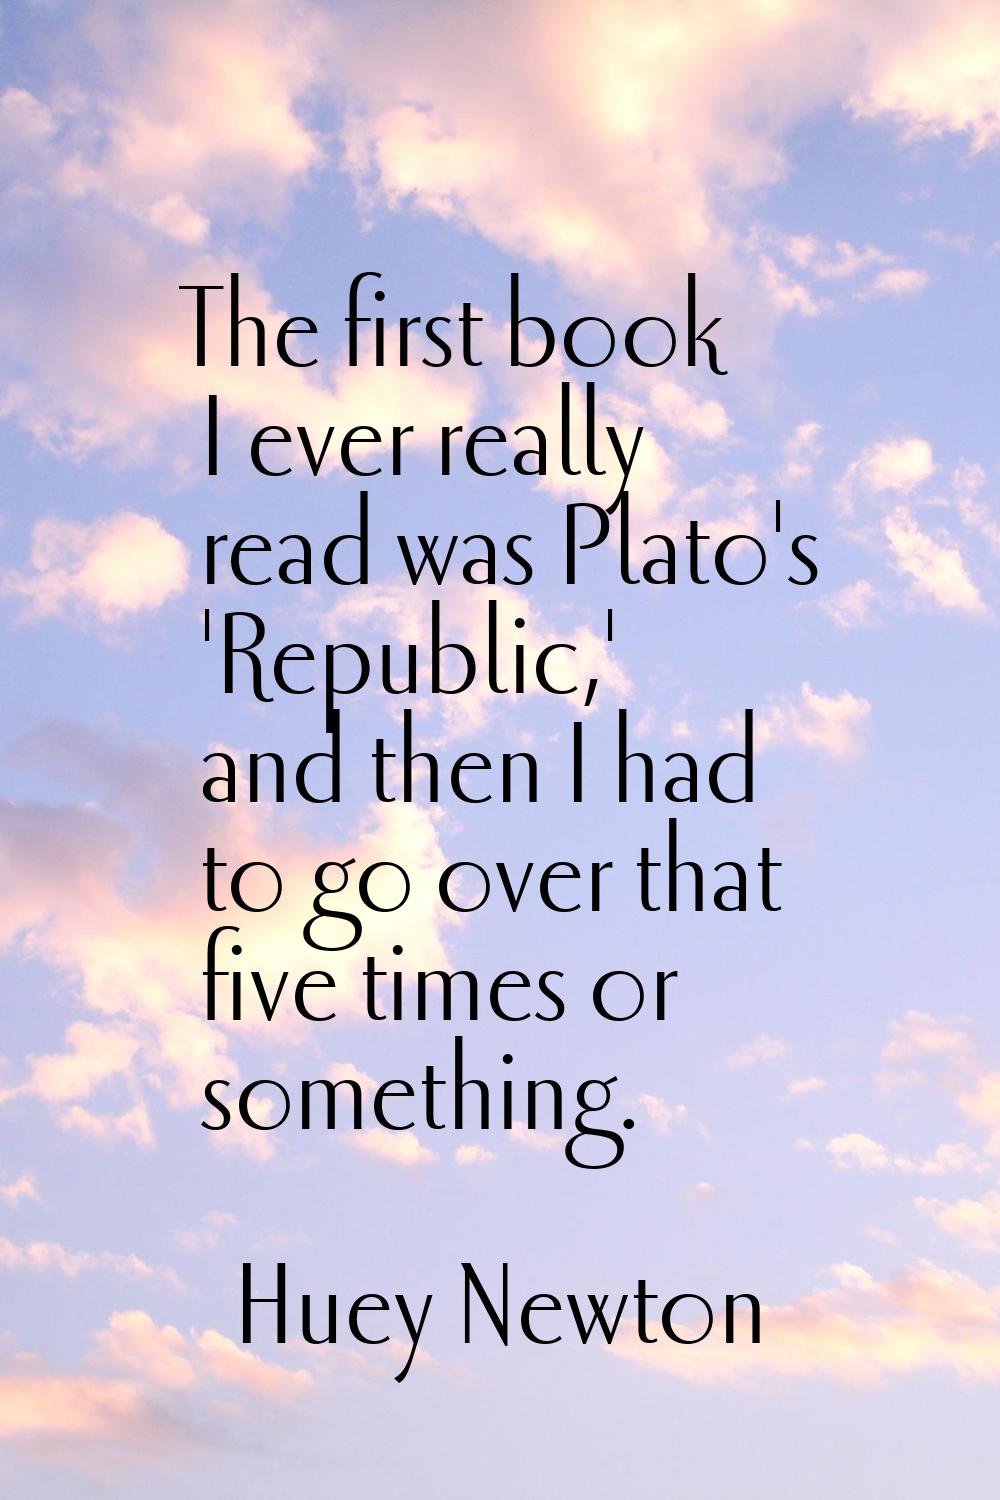 The first book I ever really read was Plato's 'Republic,' and then I had to go over that five times